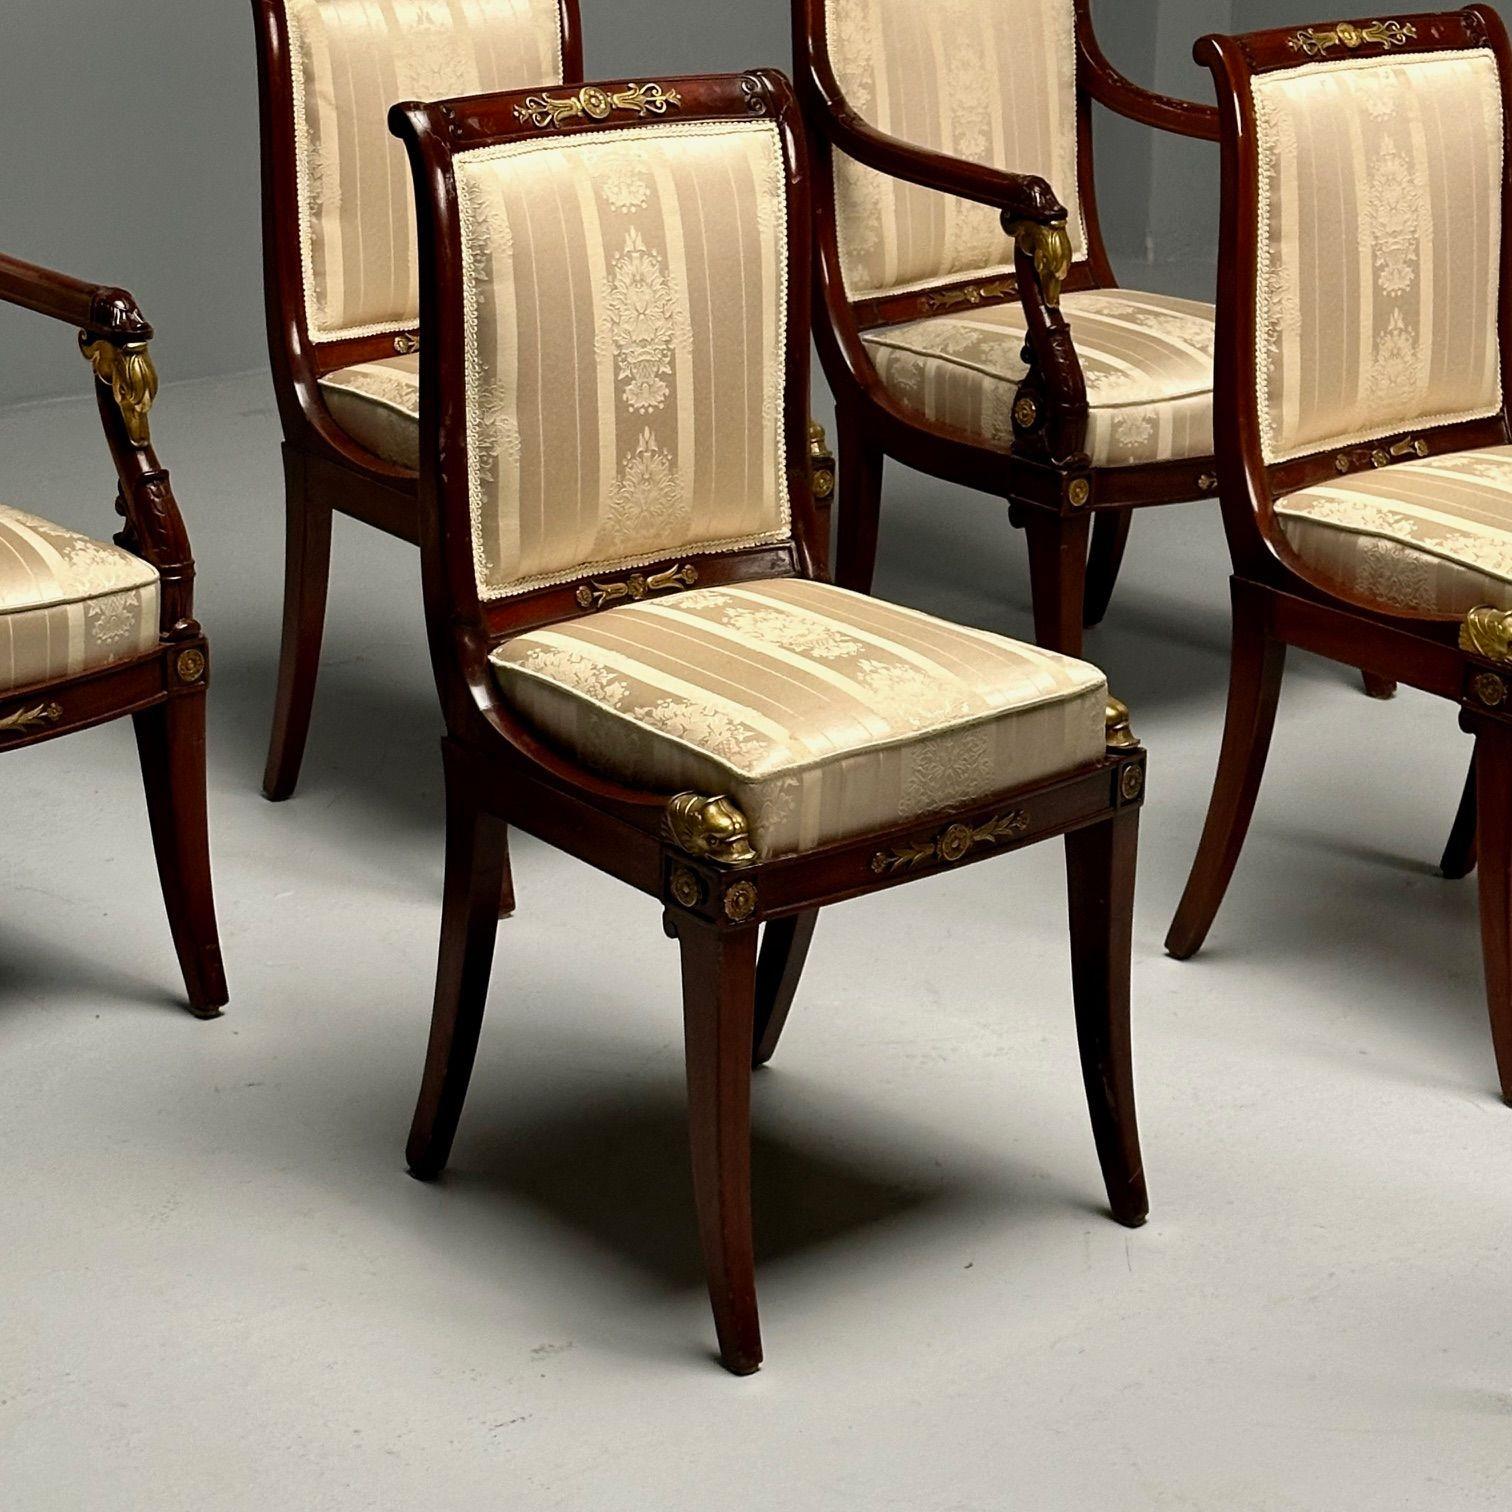 Russian Neoclassical, Six Dining Chairs, Mahogany, Bronze, Fabric, Sothebys Prov 1